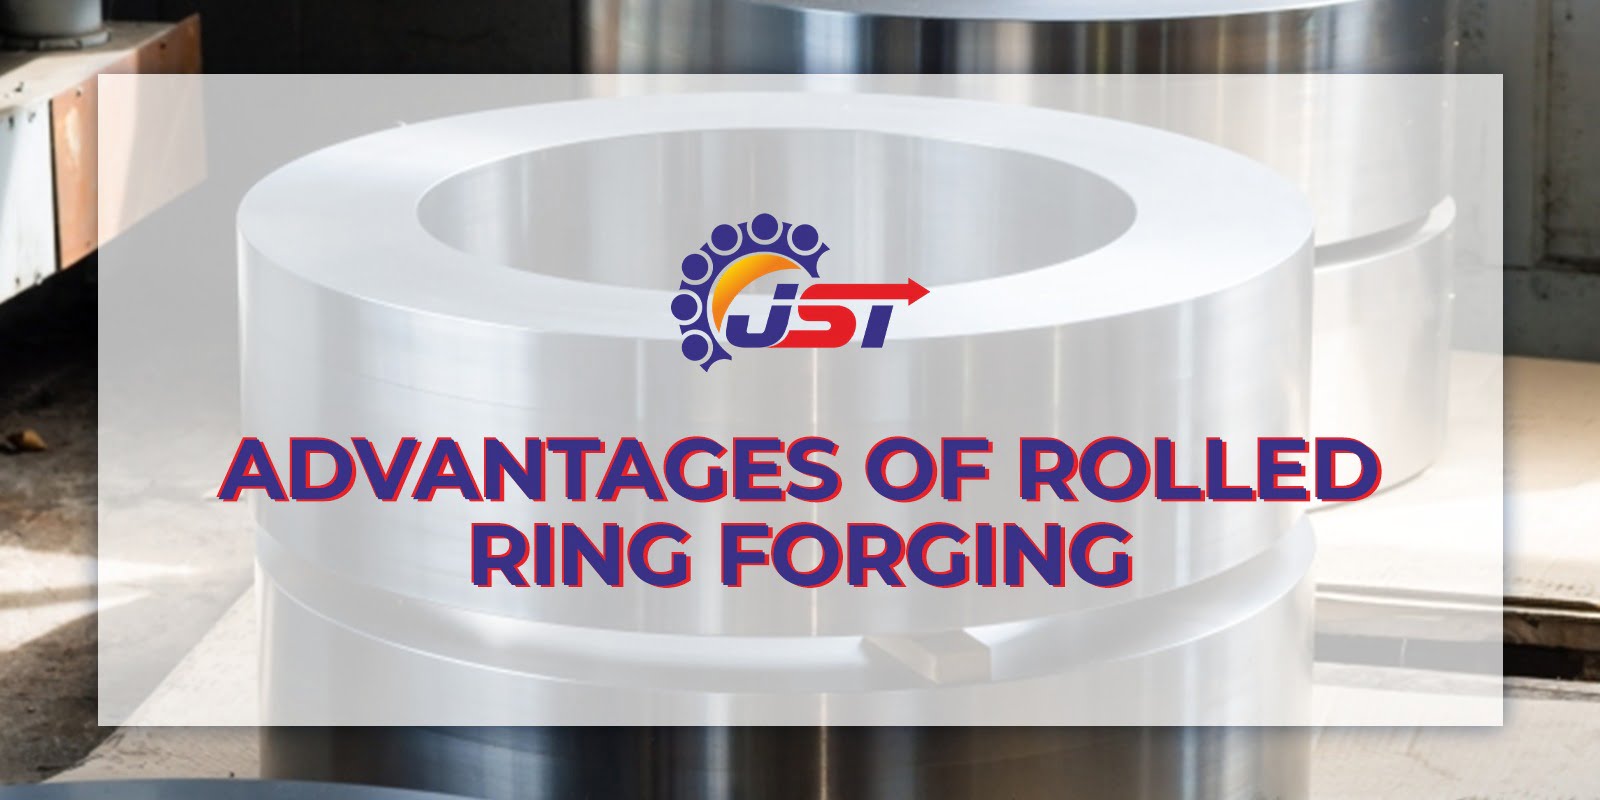 Advantages of Rolled Ring Forging